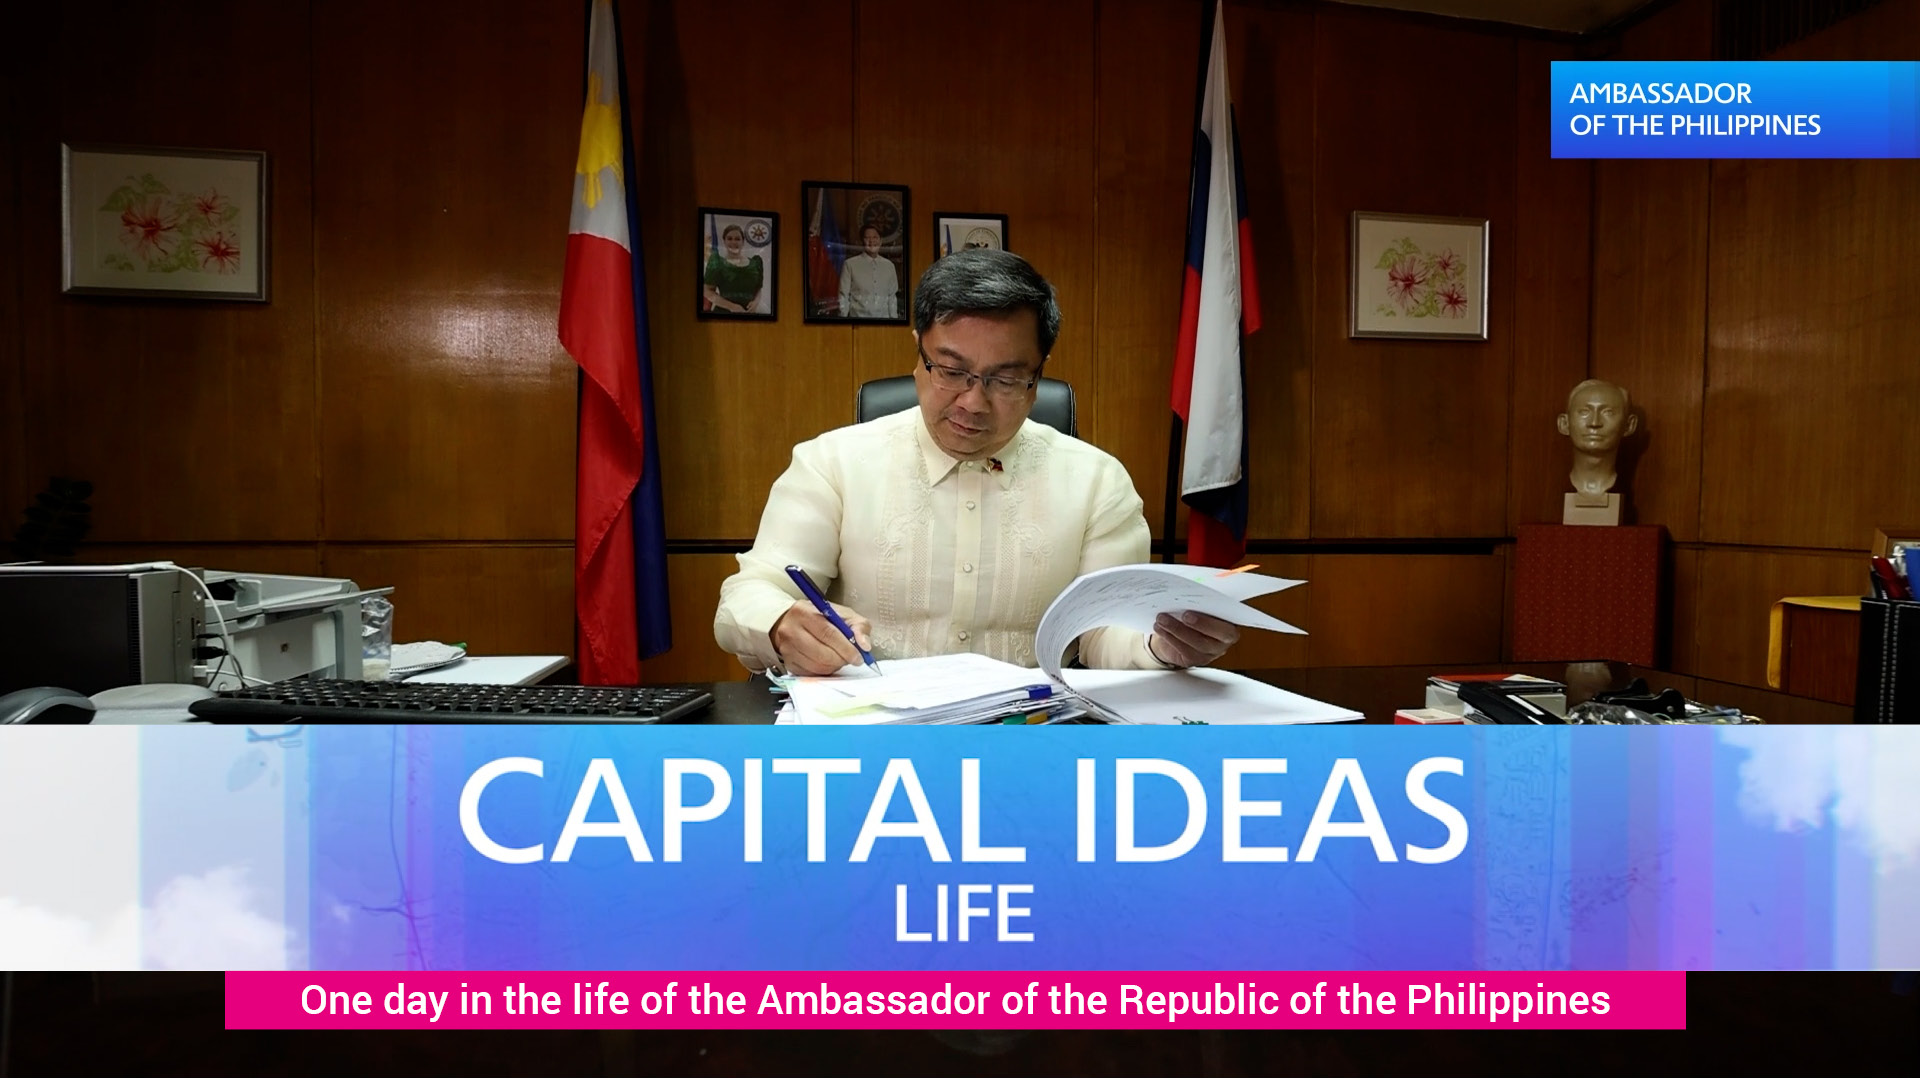 Capital Ideas Life. One day in the life of the Ambassador of the Republic of the Philippines.